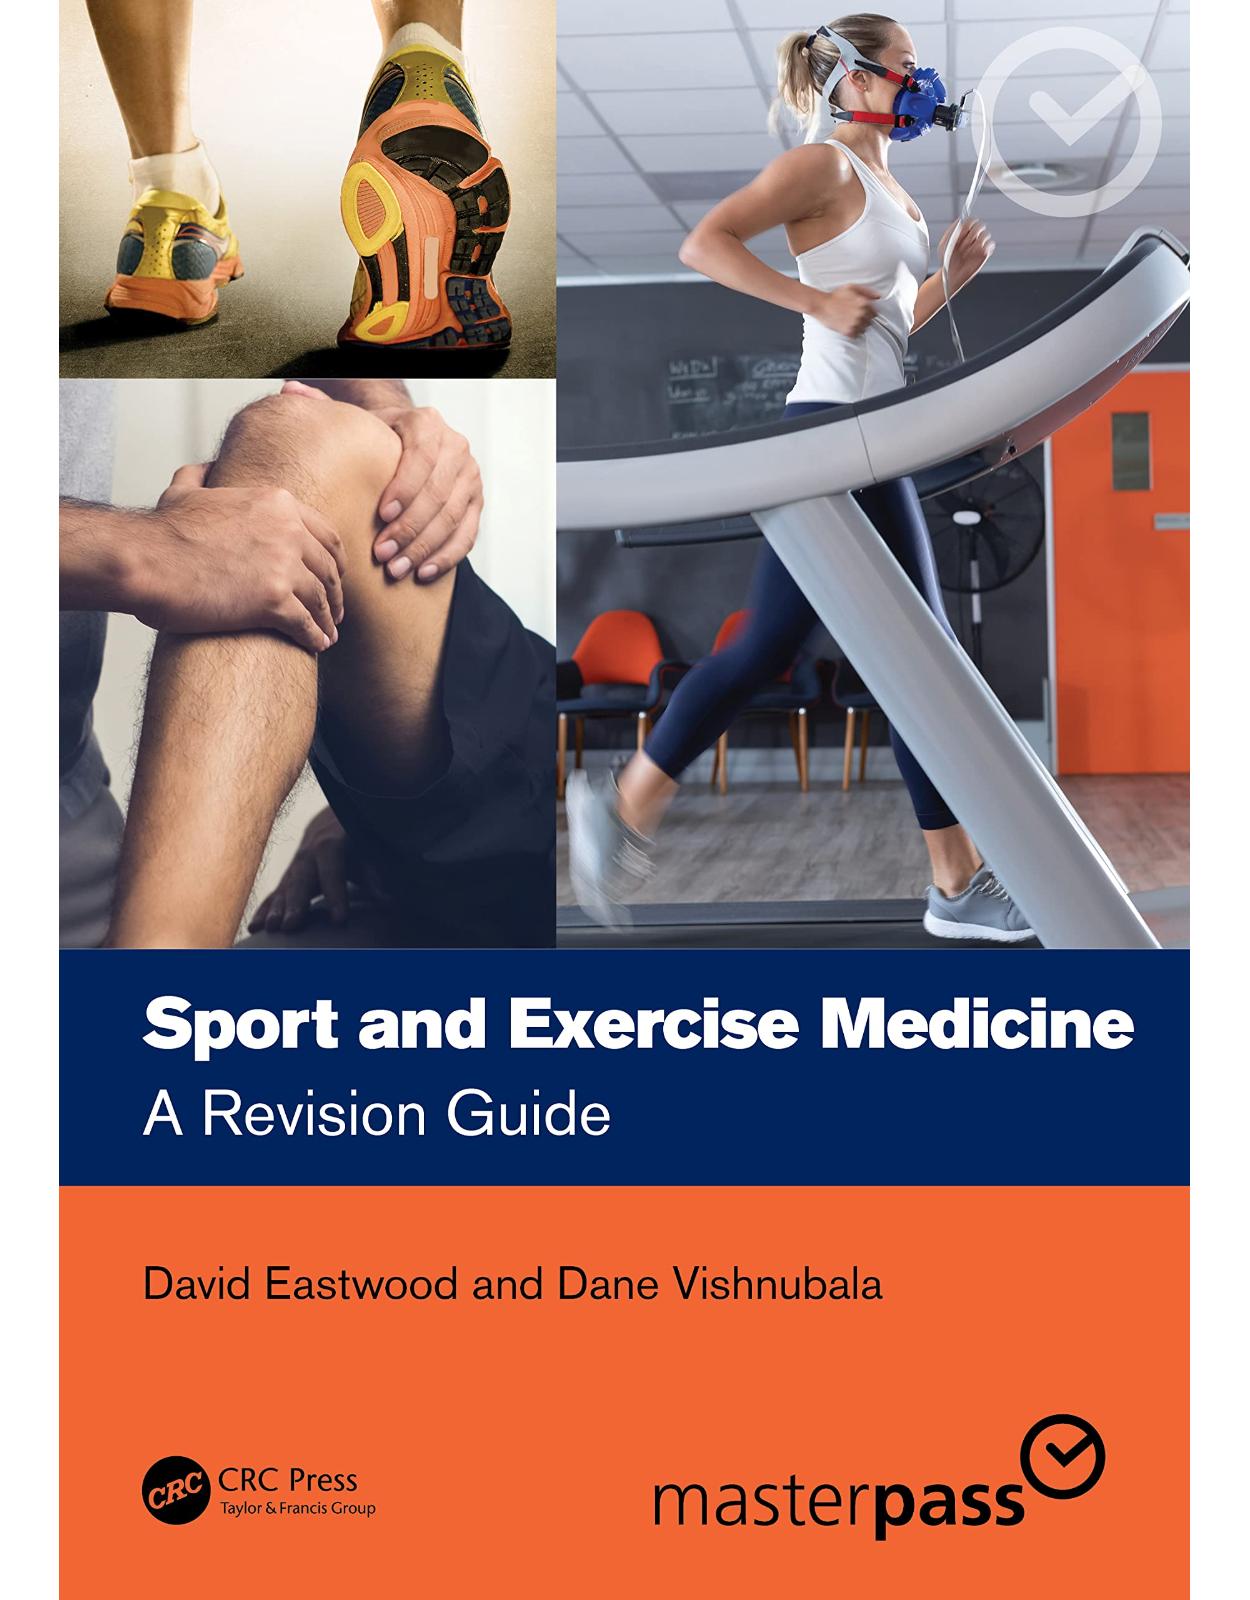 Sport and Exercise Medicine: An Essential Guide